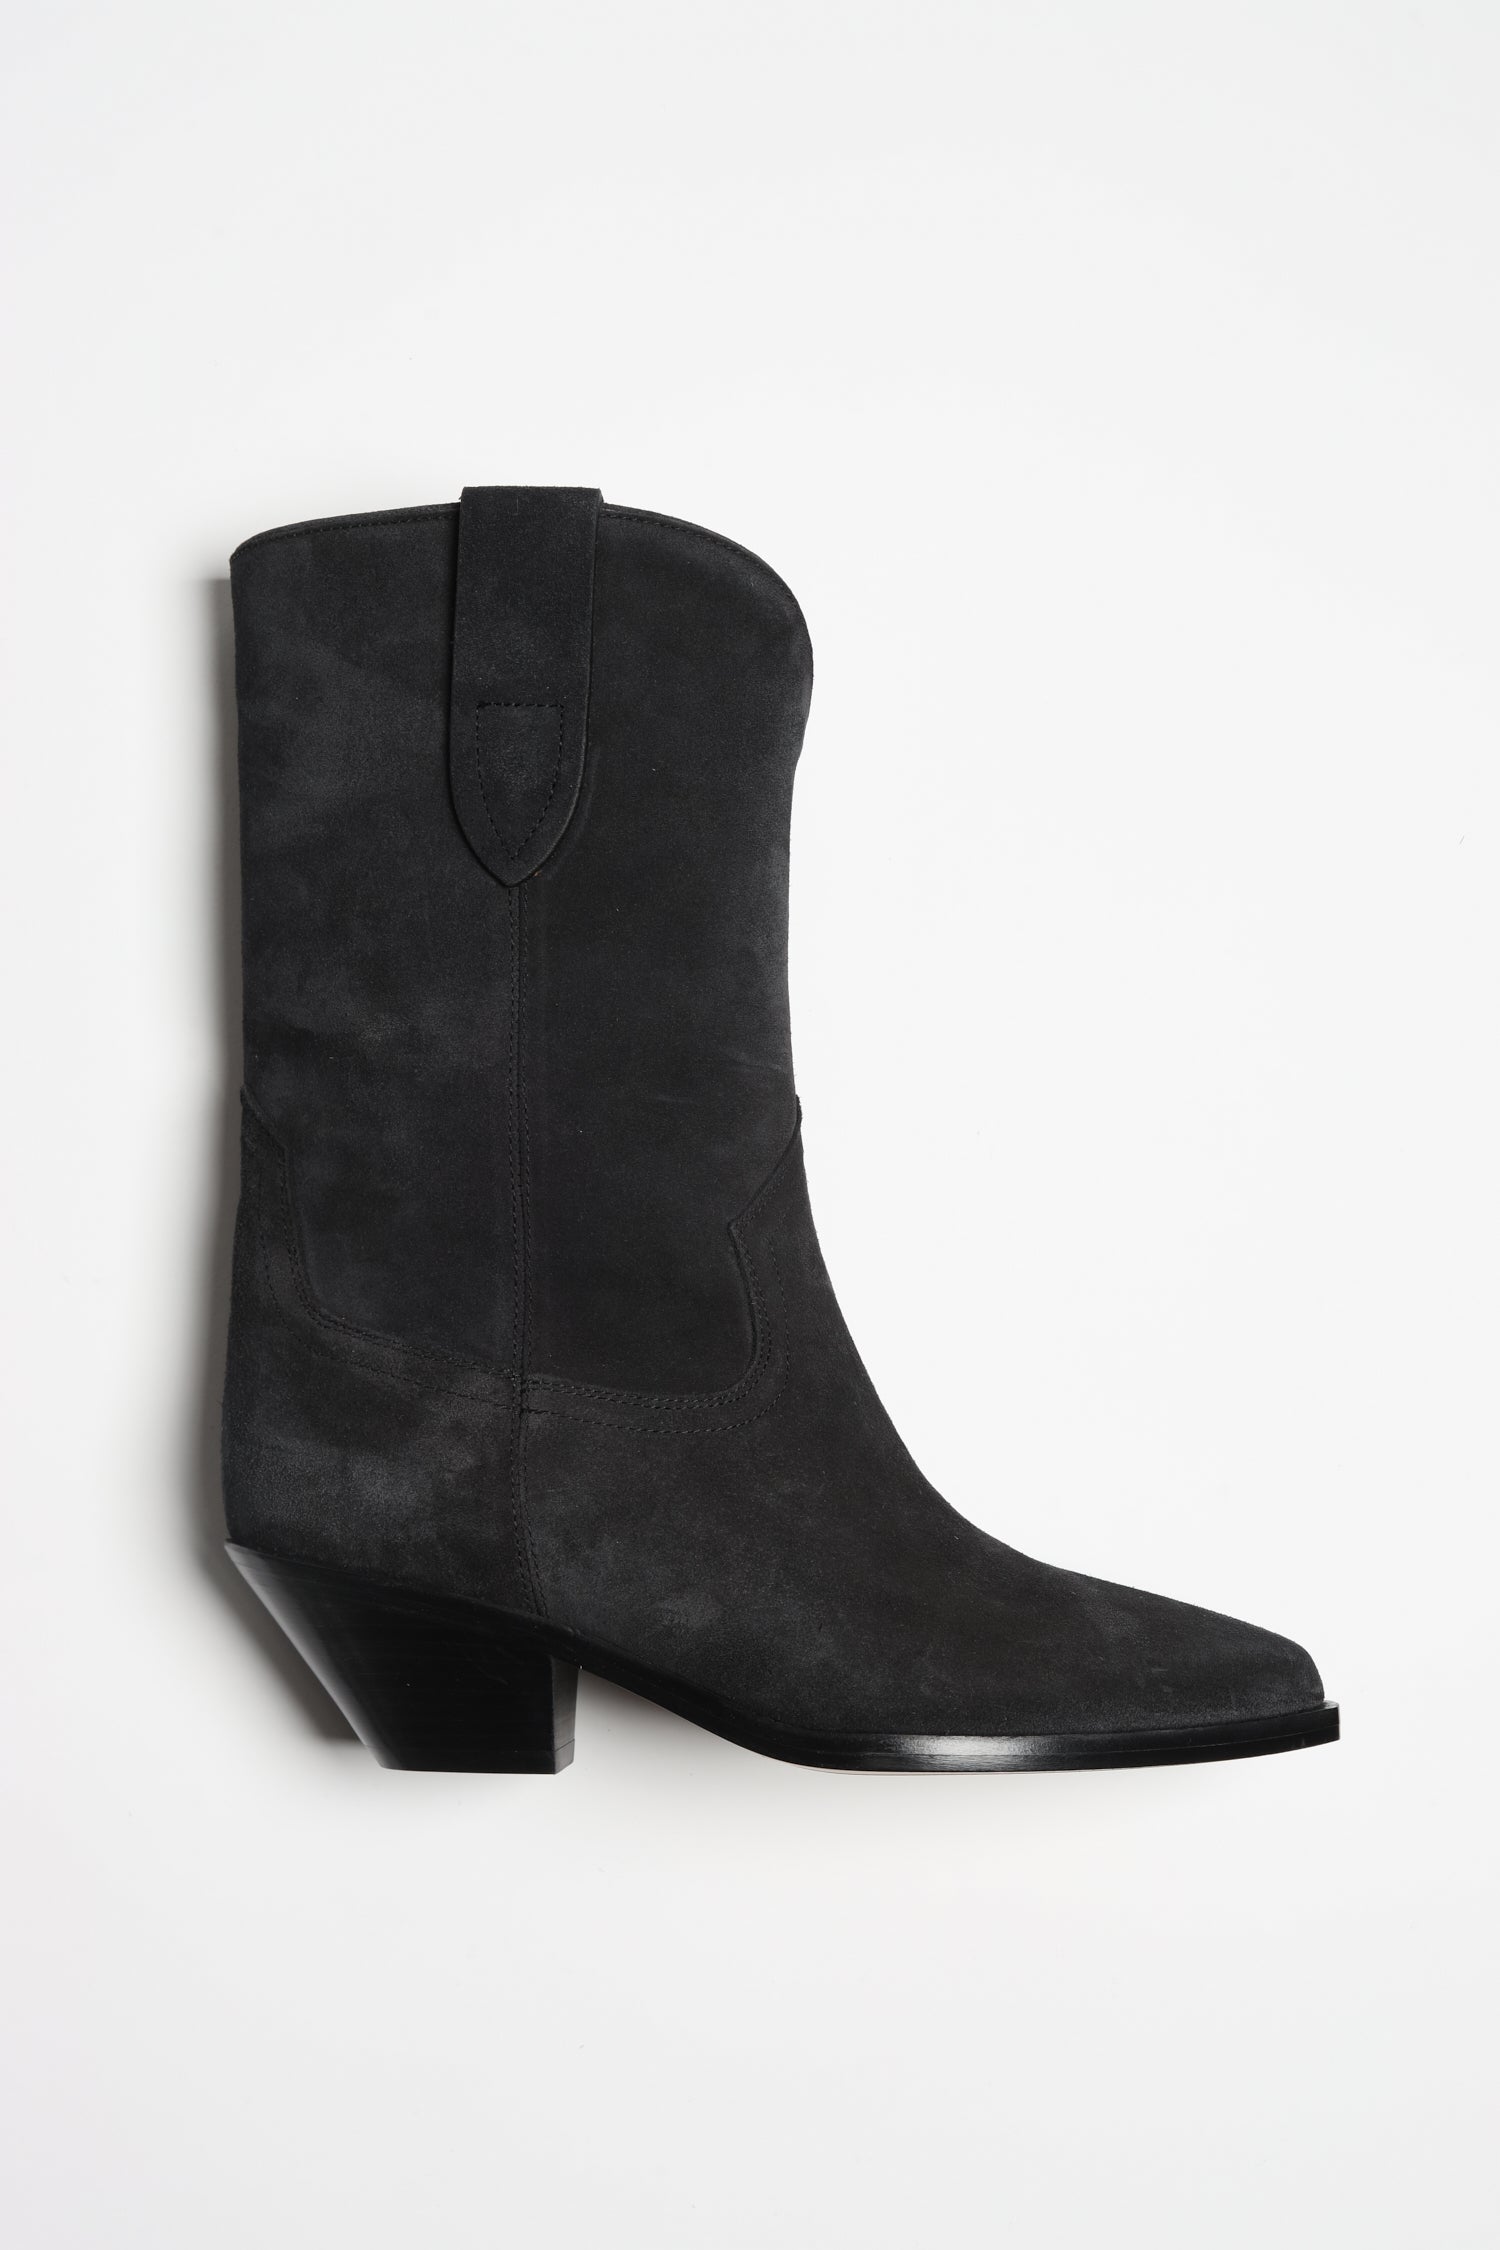 Boots Dahope in Faded BlackIsabel Marant - Anita Hass